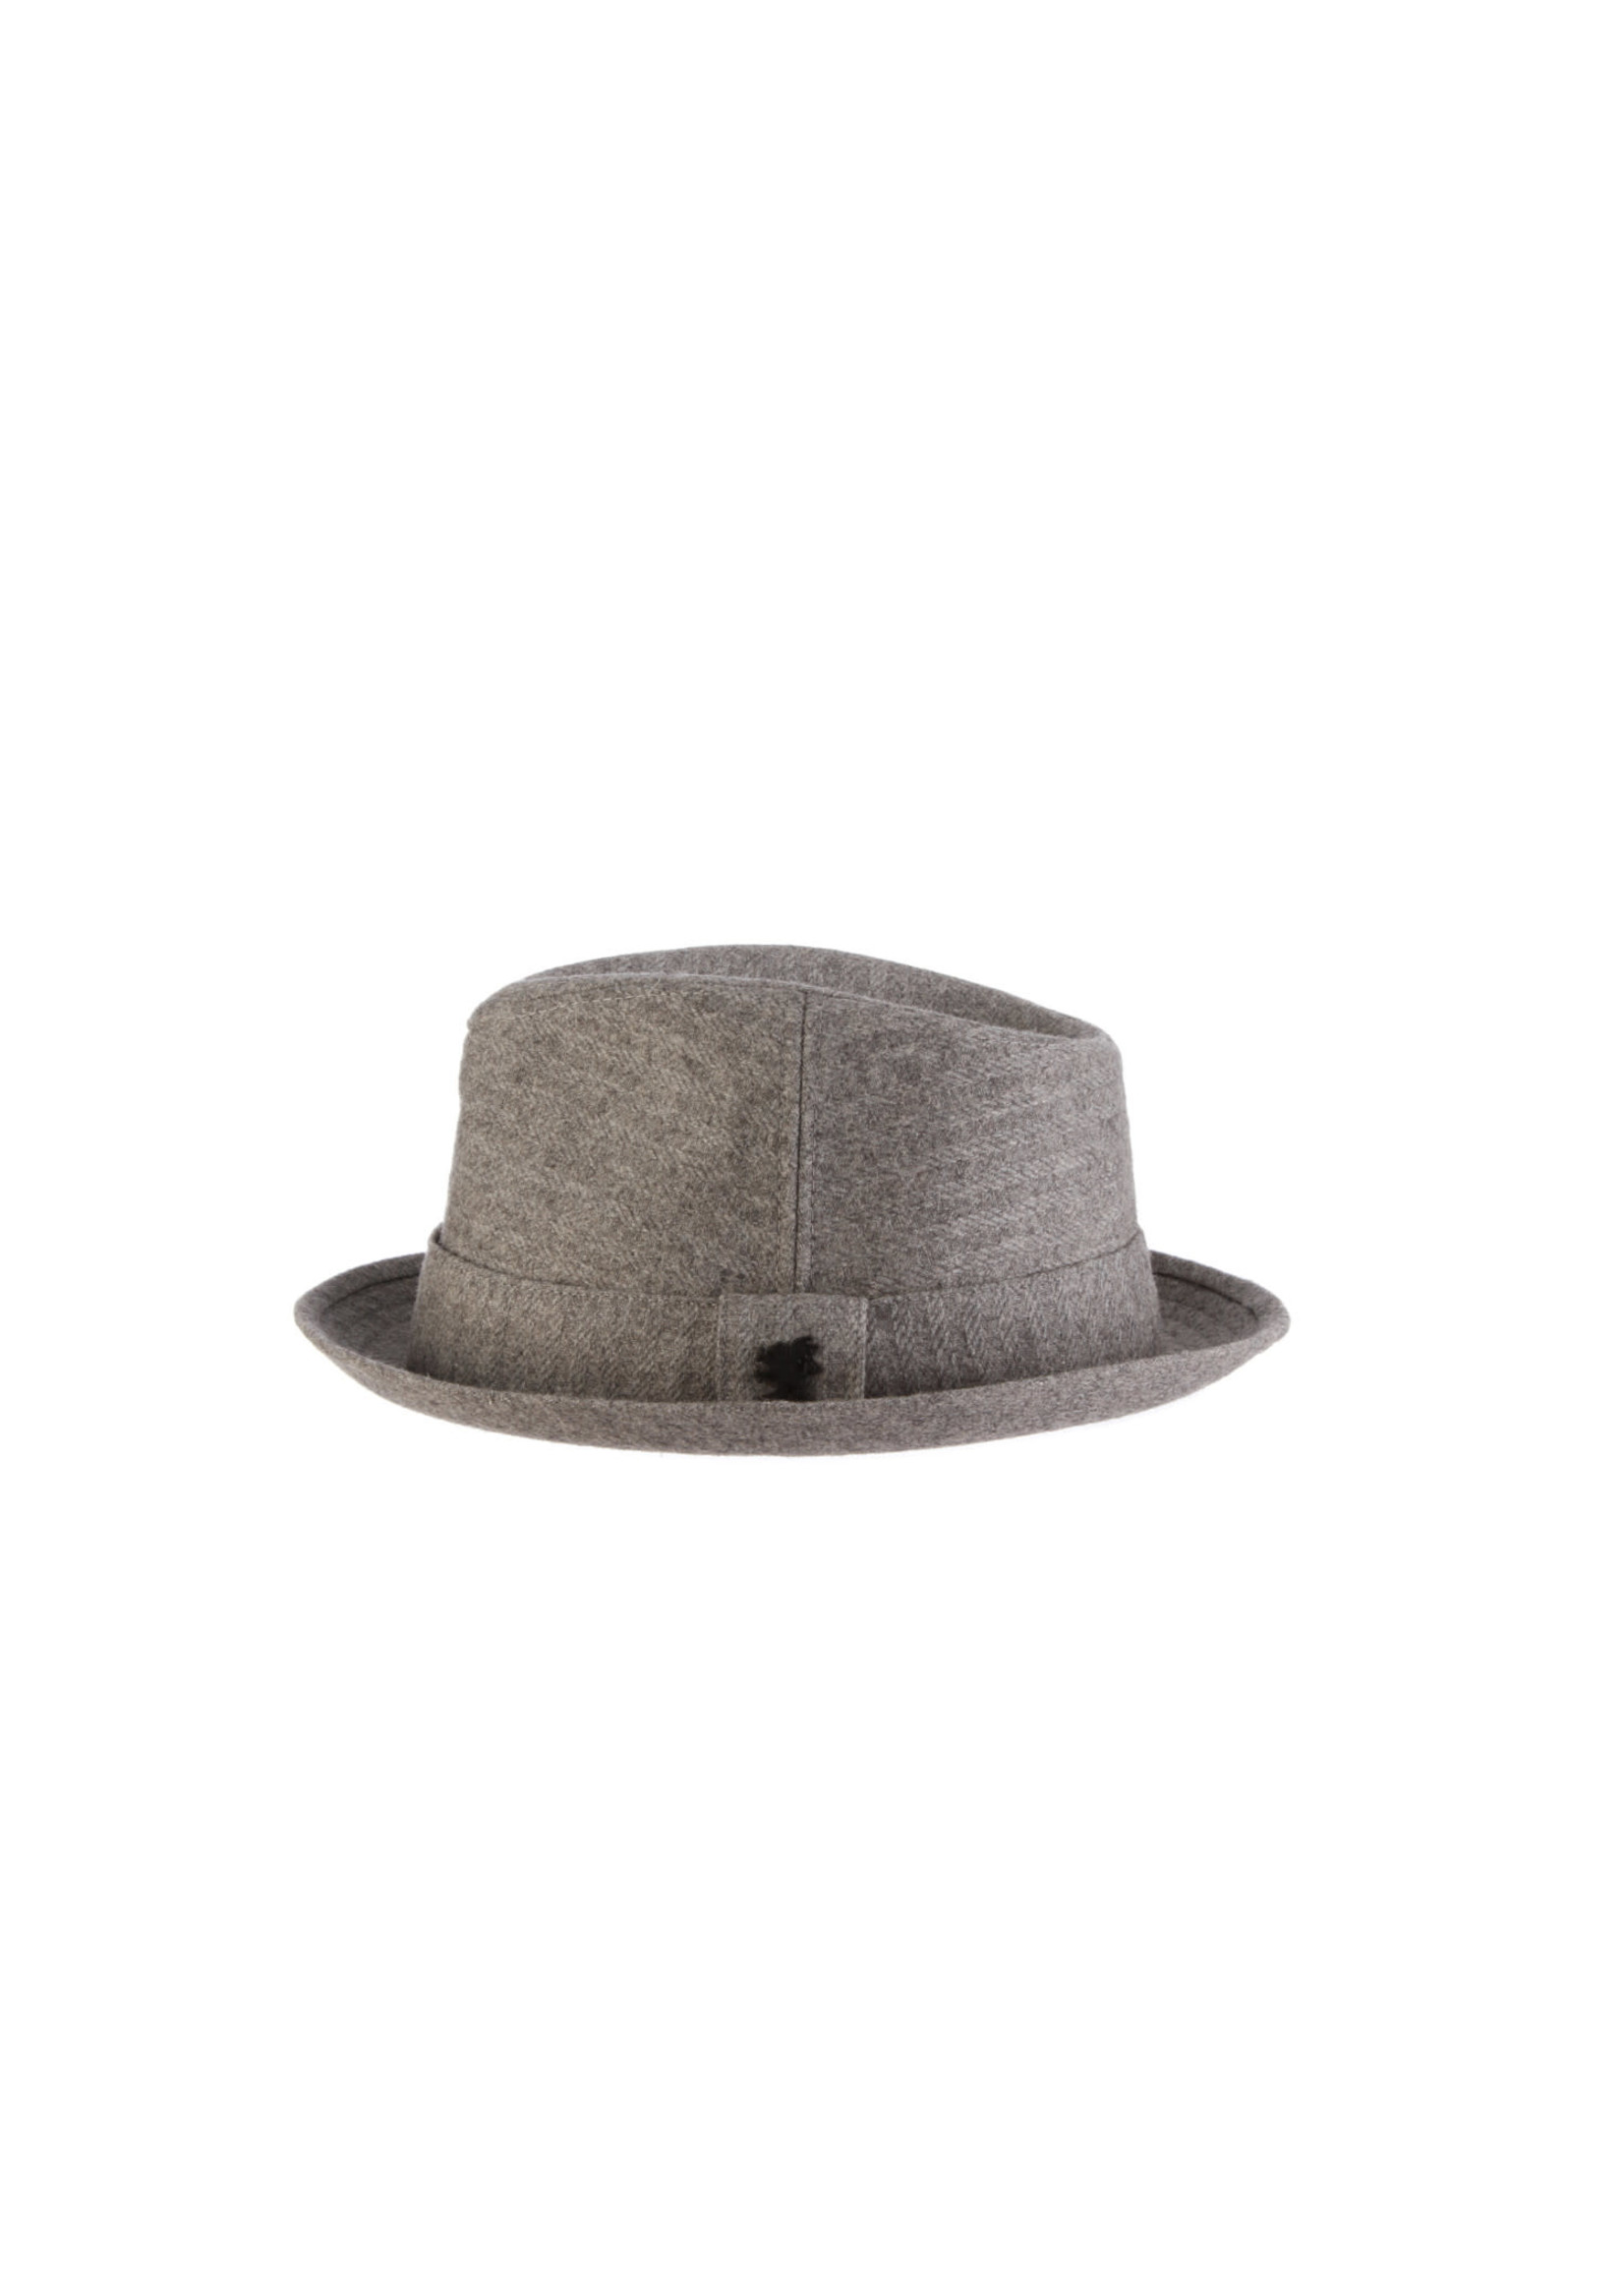 Stacy Adams The "Carson" Fedora by Stacy Adams